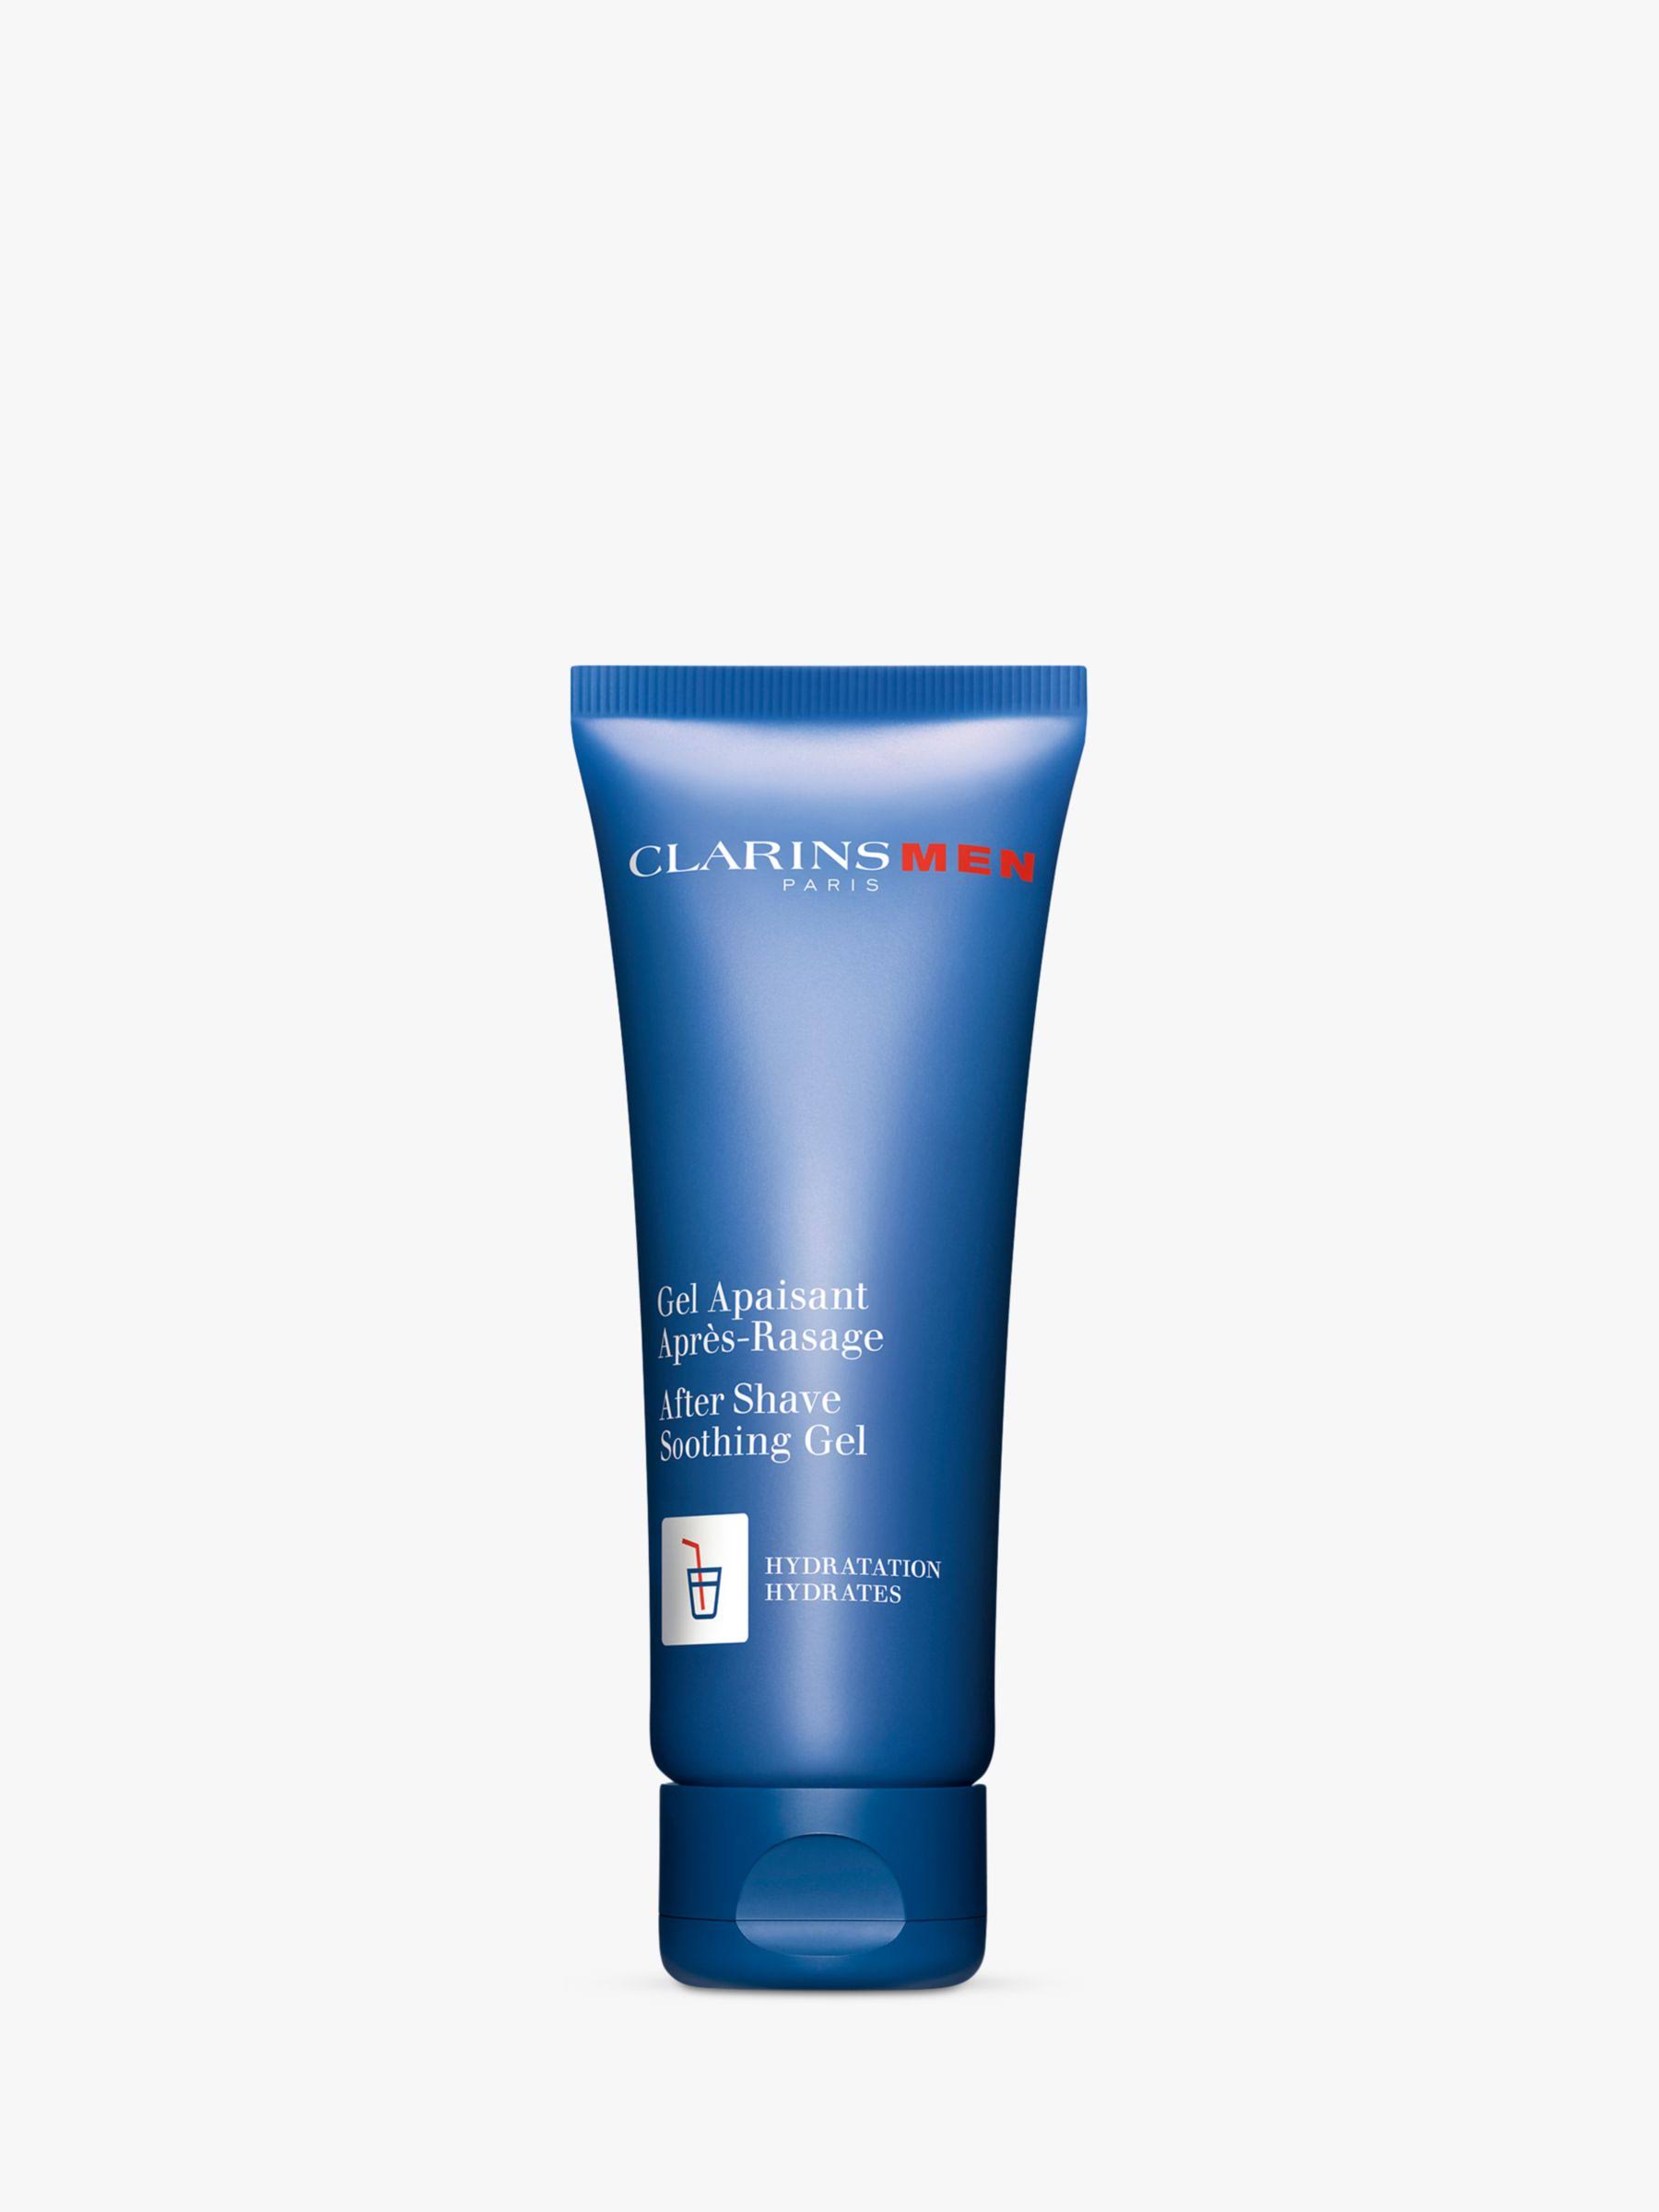 Clarins Men After Shave Soothing Gel 75Ml